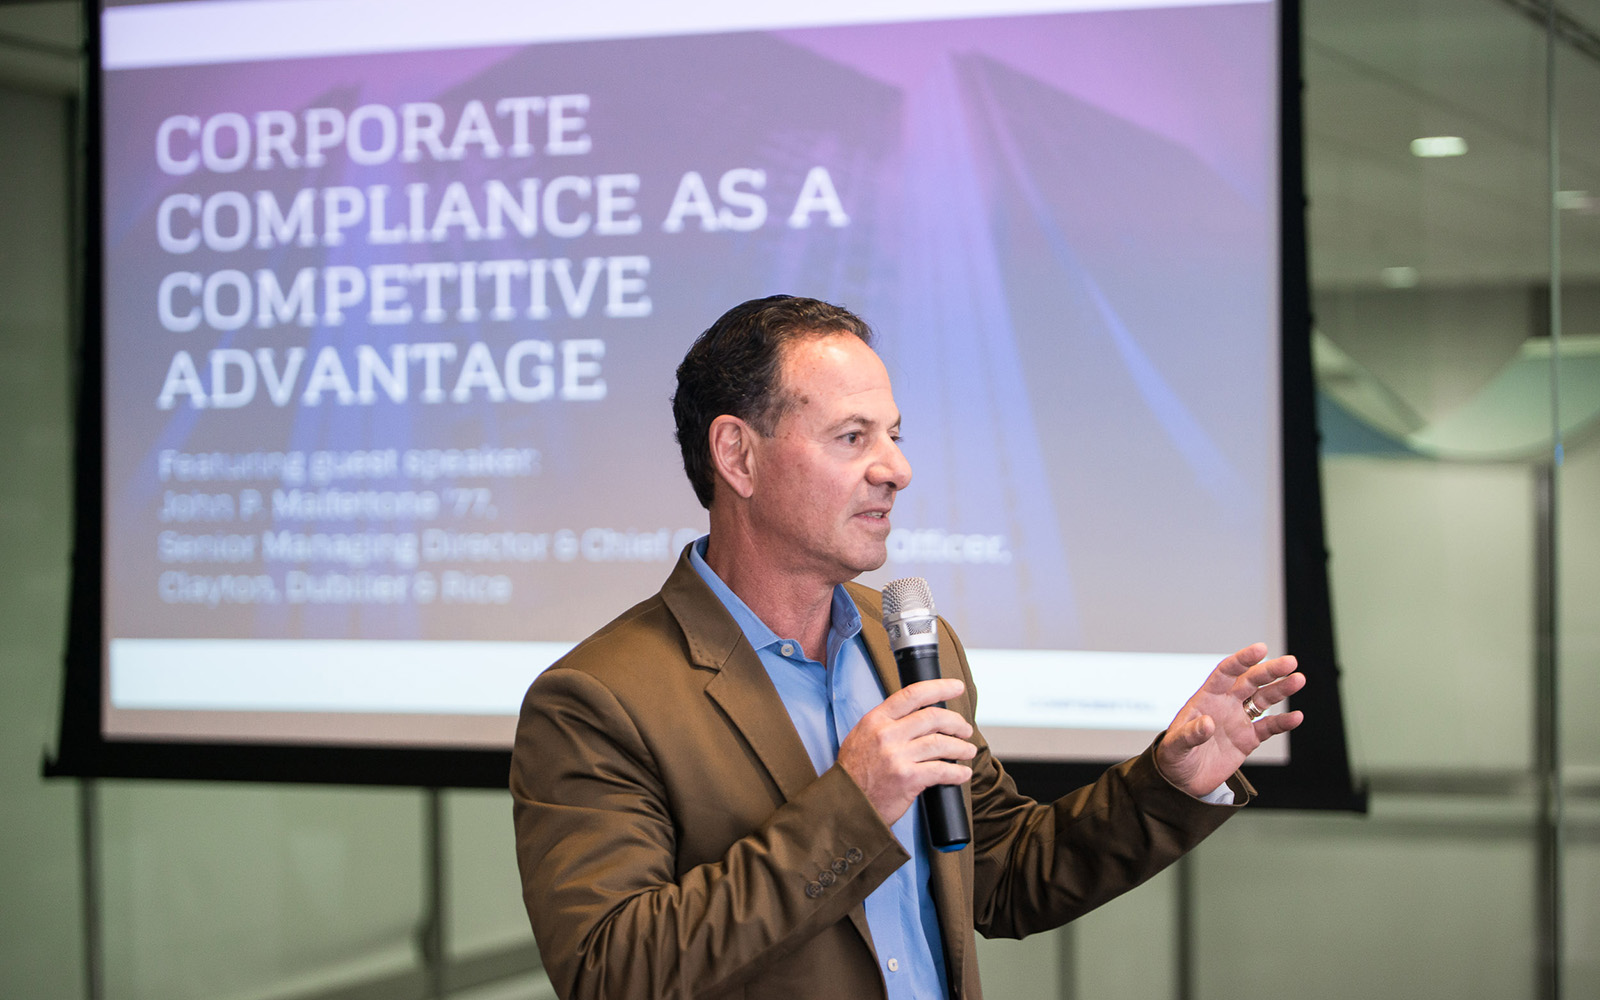 John Malfettone '77 speaks about corporate compliance as a competitive advantage. (Nathan Oldham/UConn School of Business)